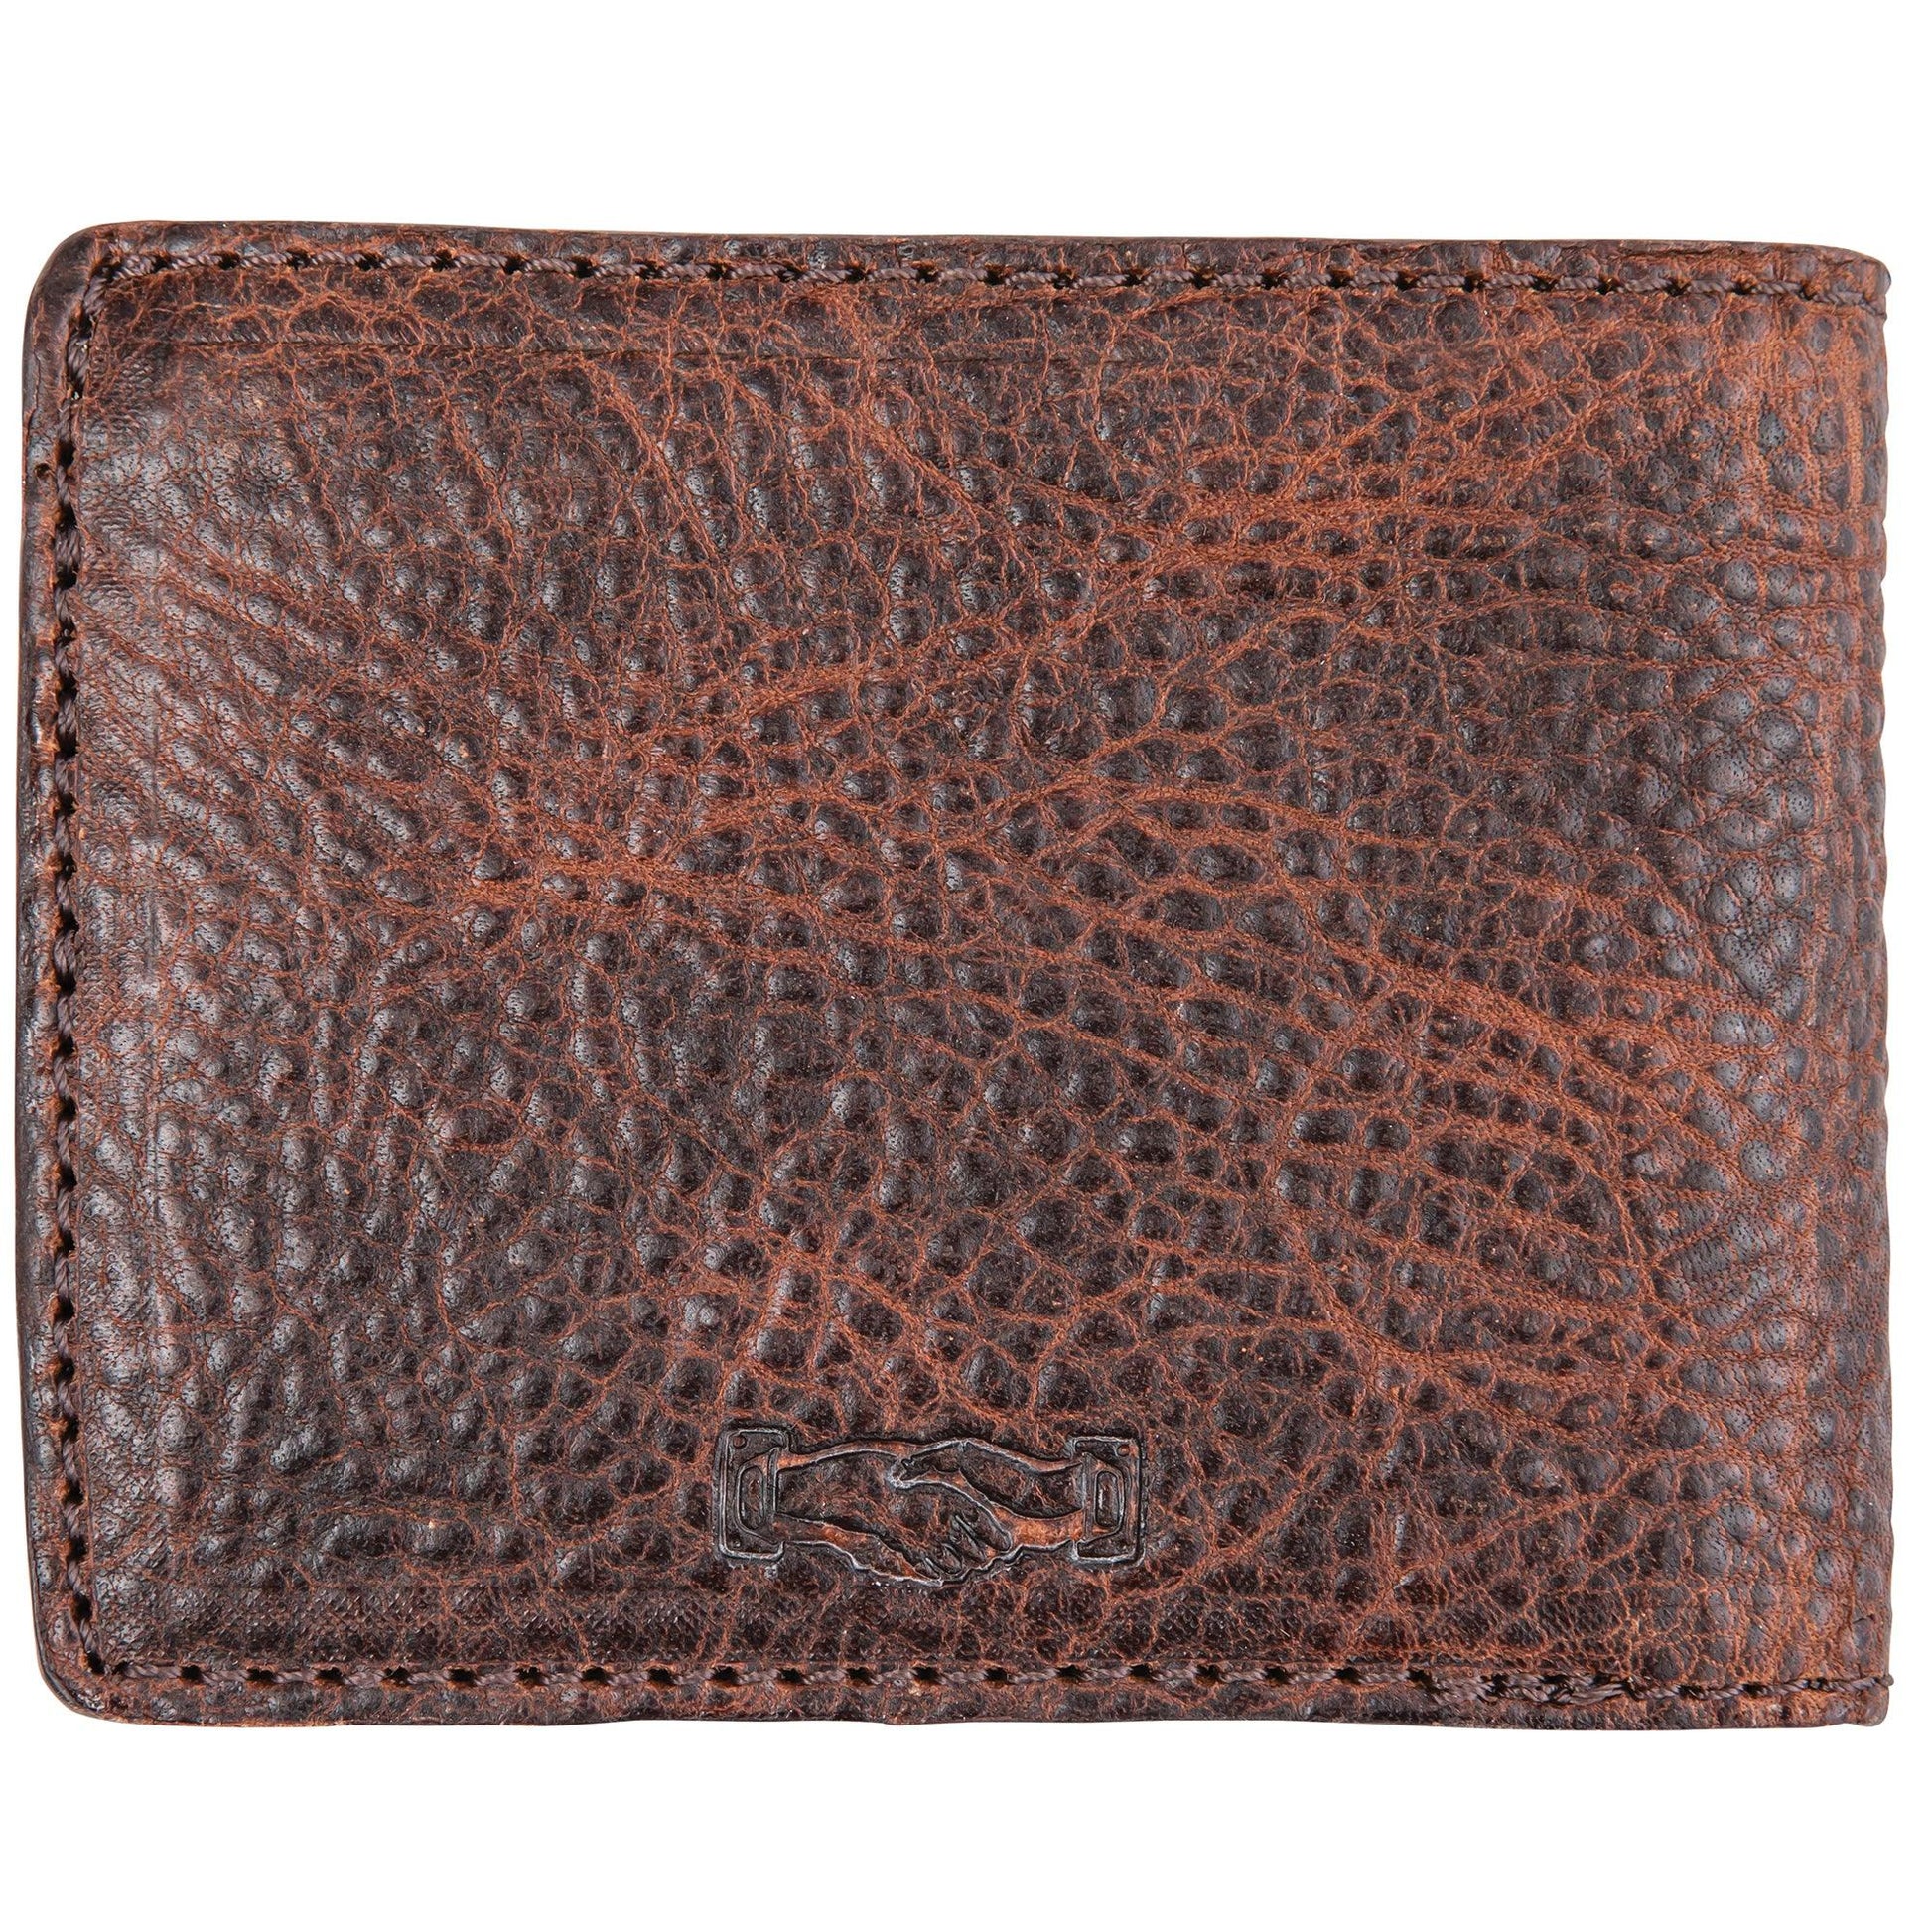 Campaign Leather Bifold Wallet - Onward Reserve